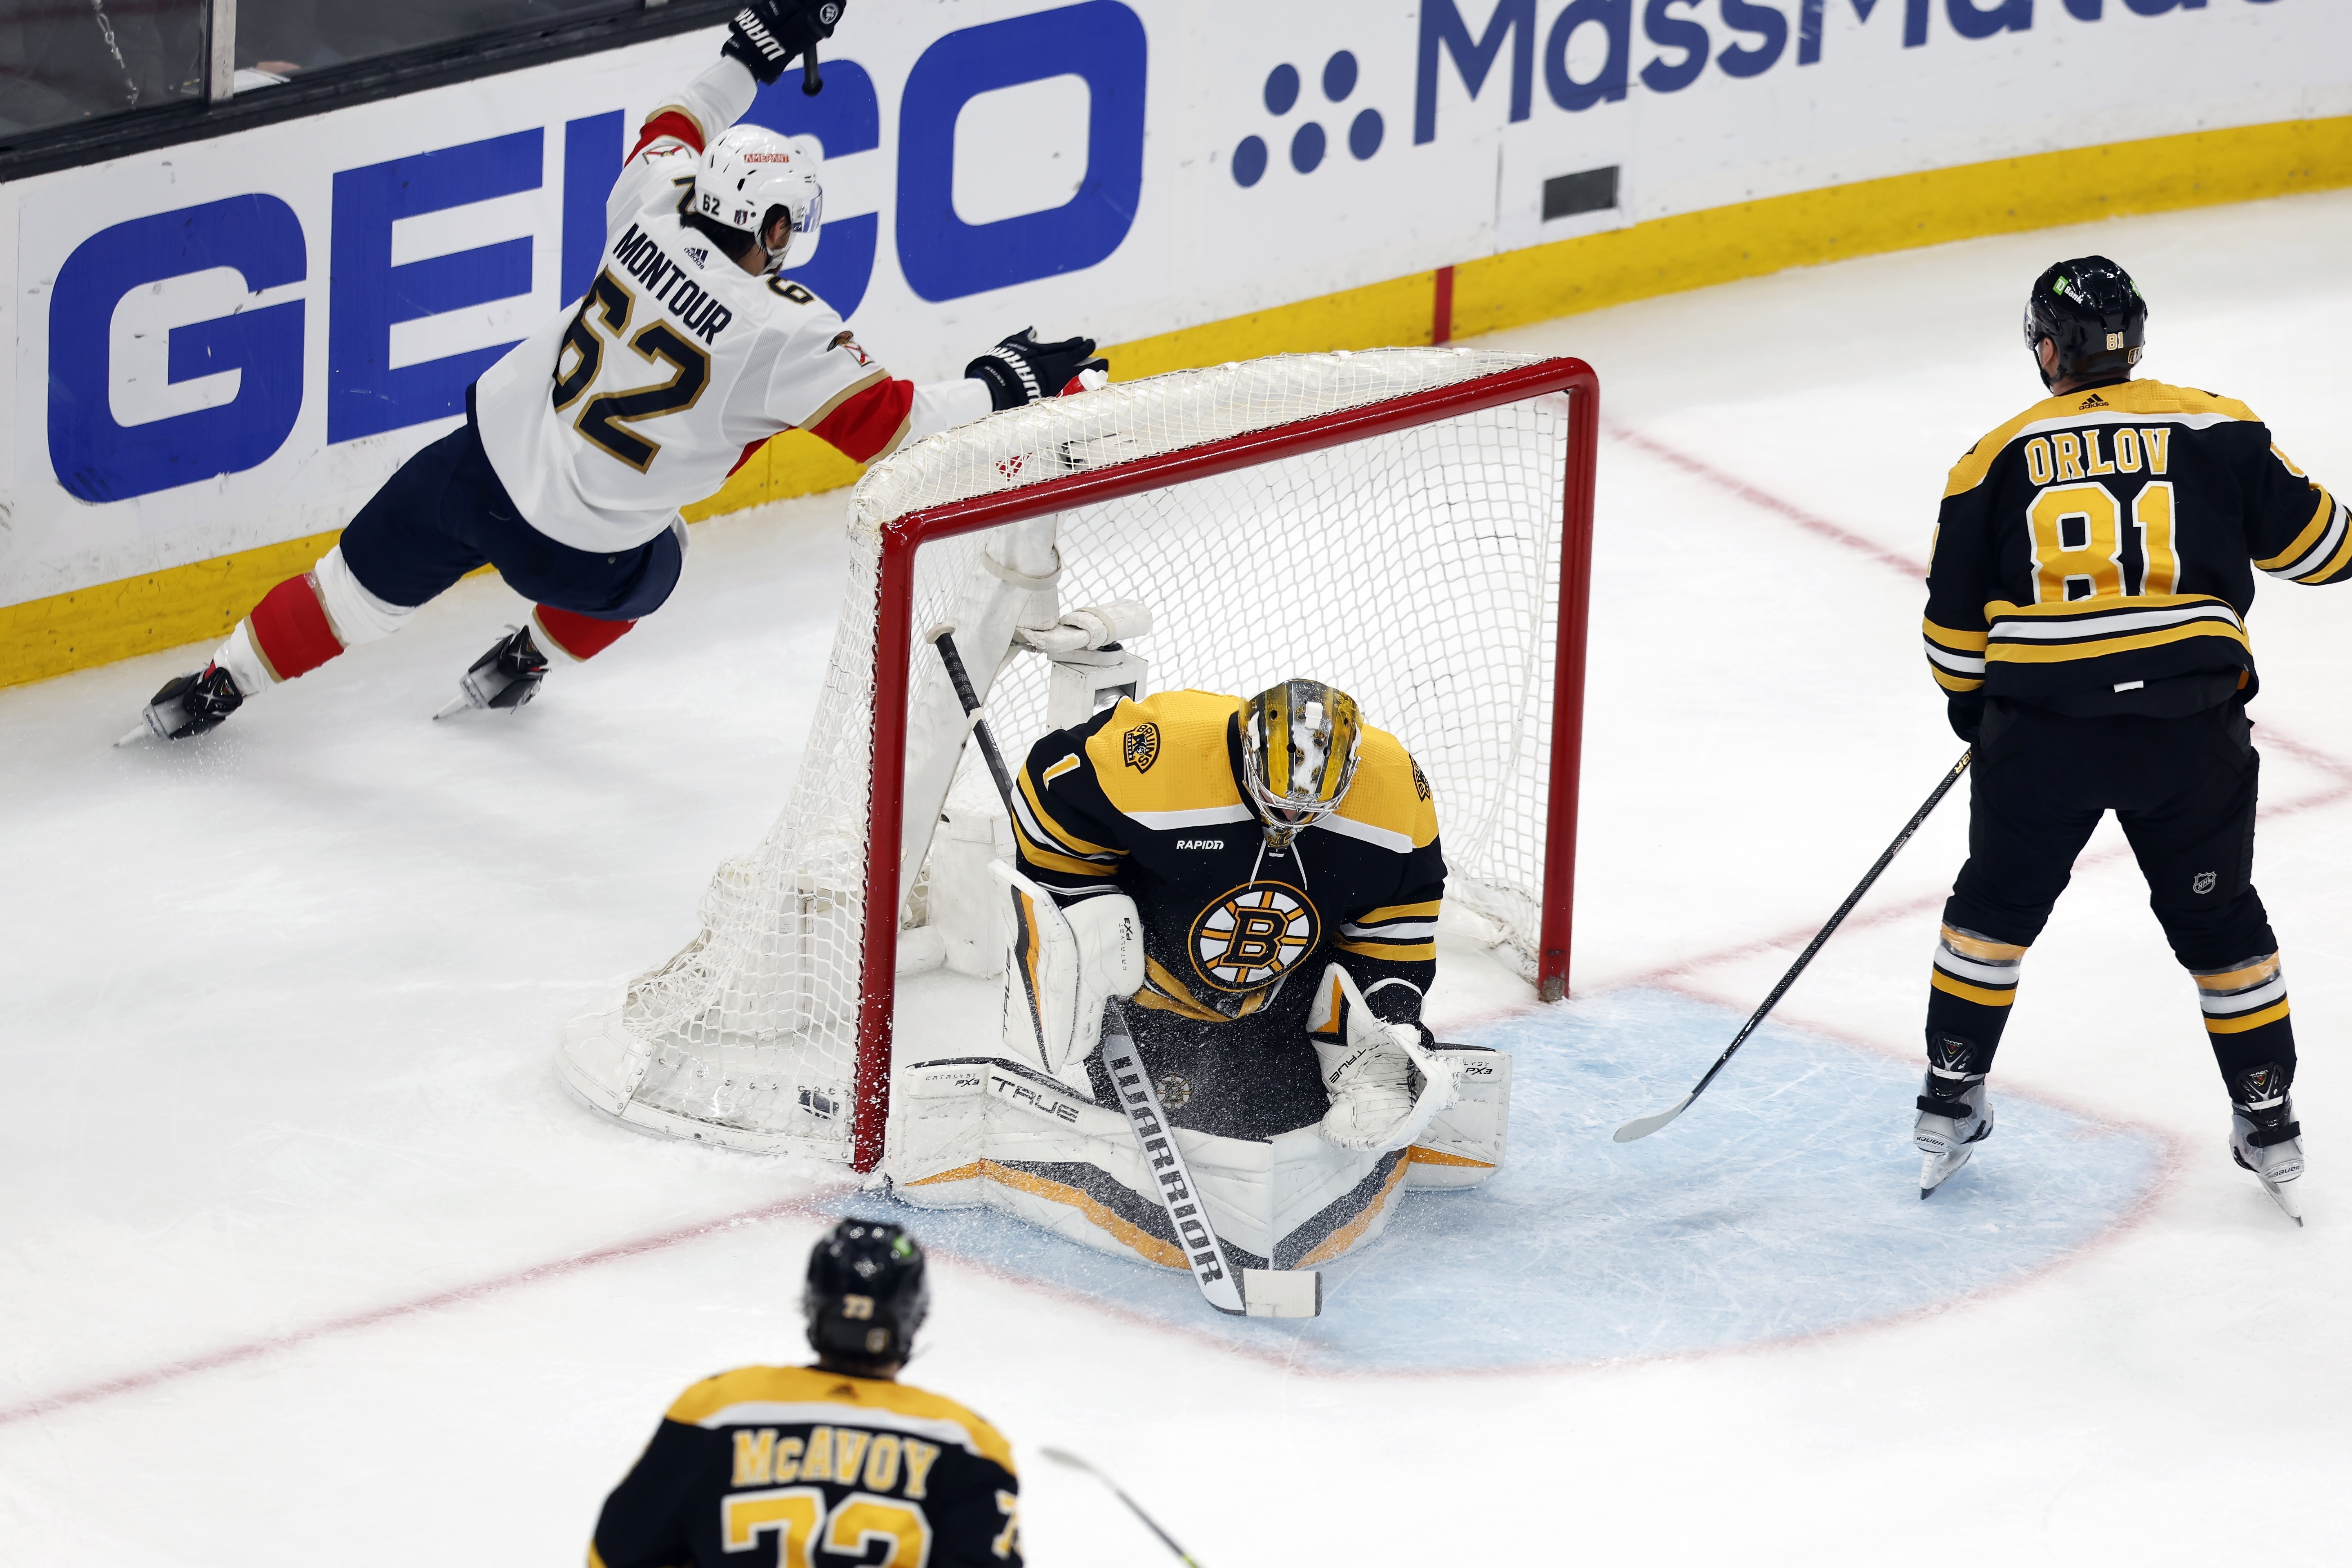 Bruins lose to Panthers, 4-3 in OT, and record-breaking season comes to an  end